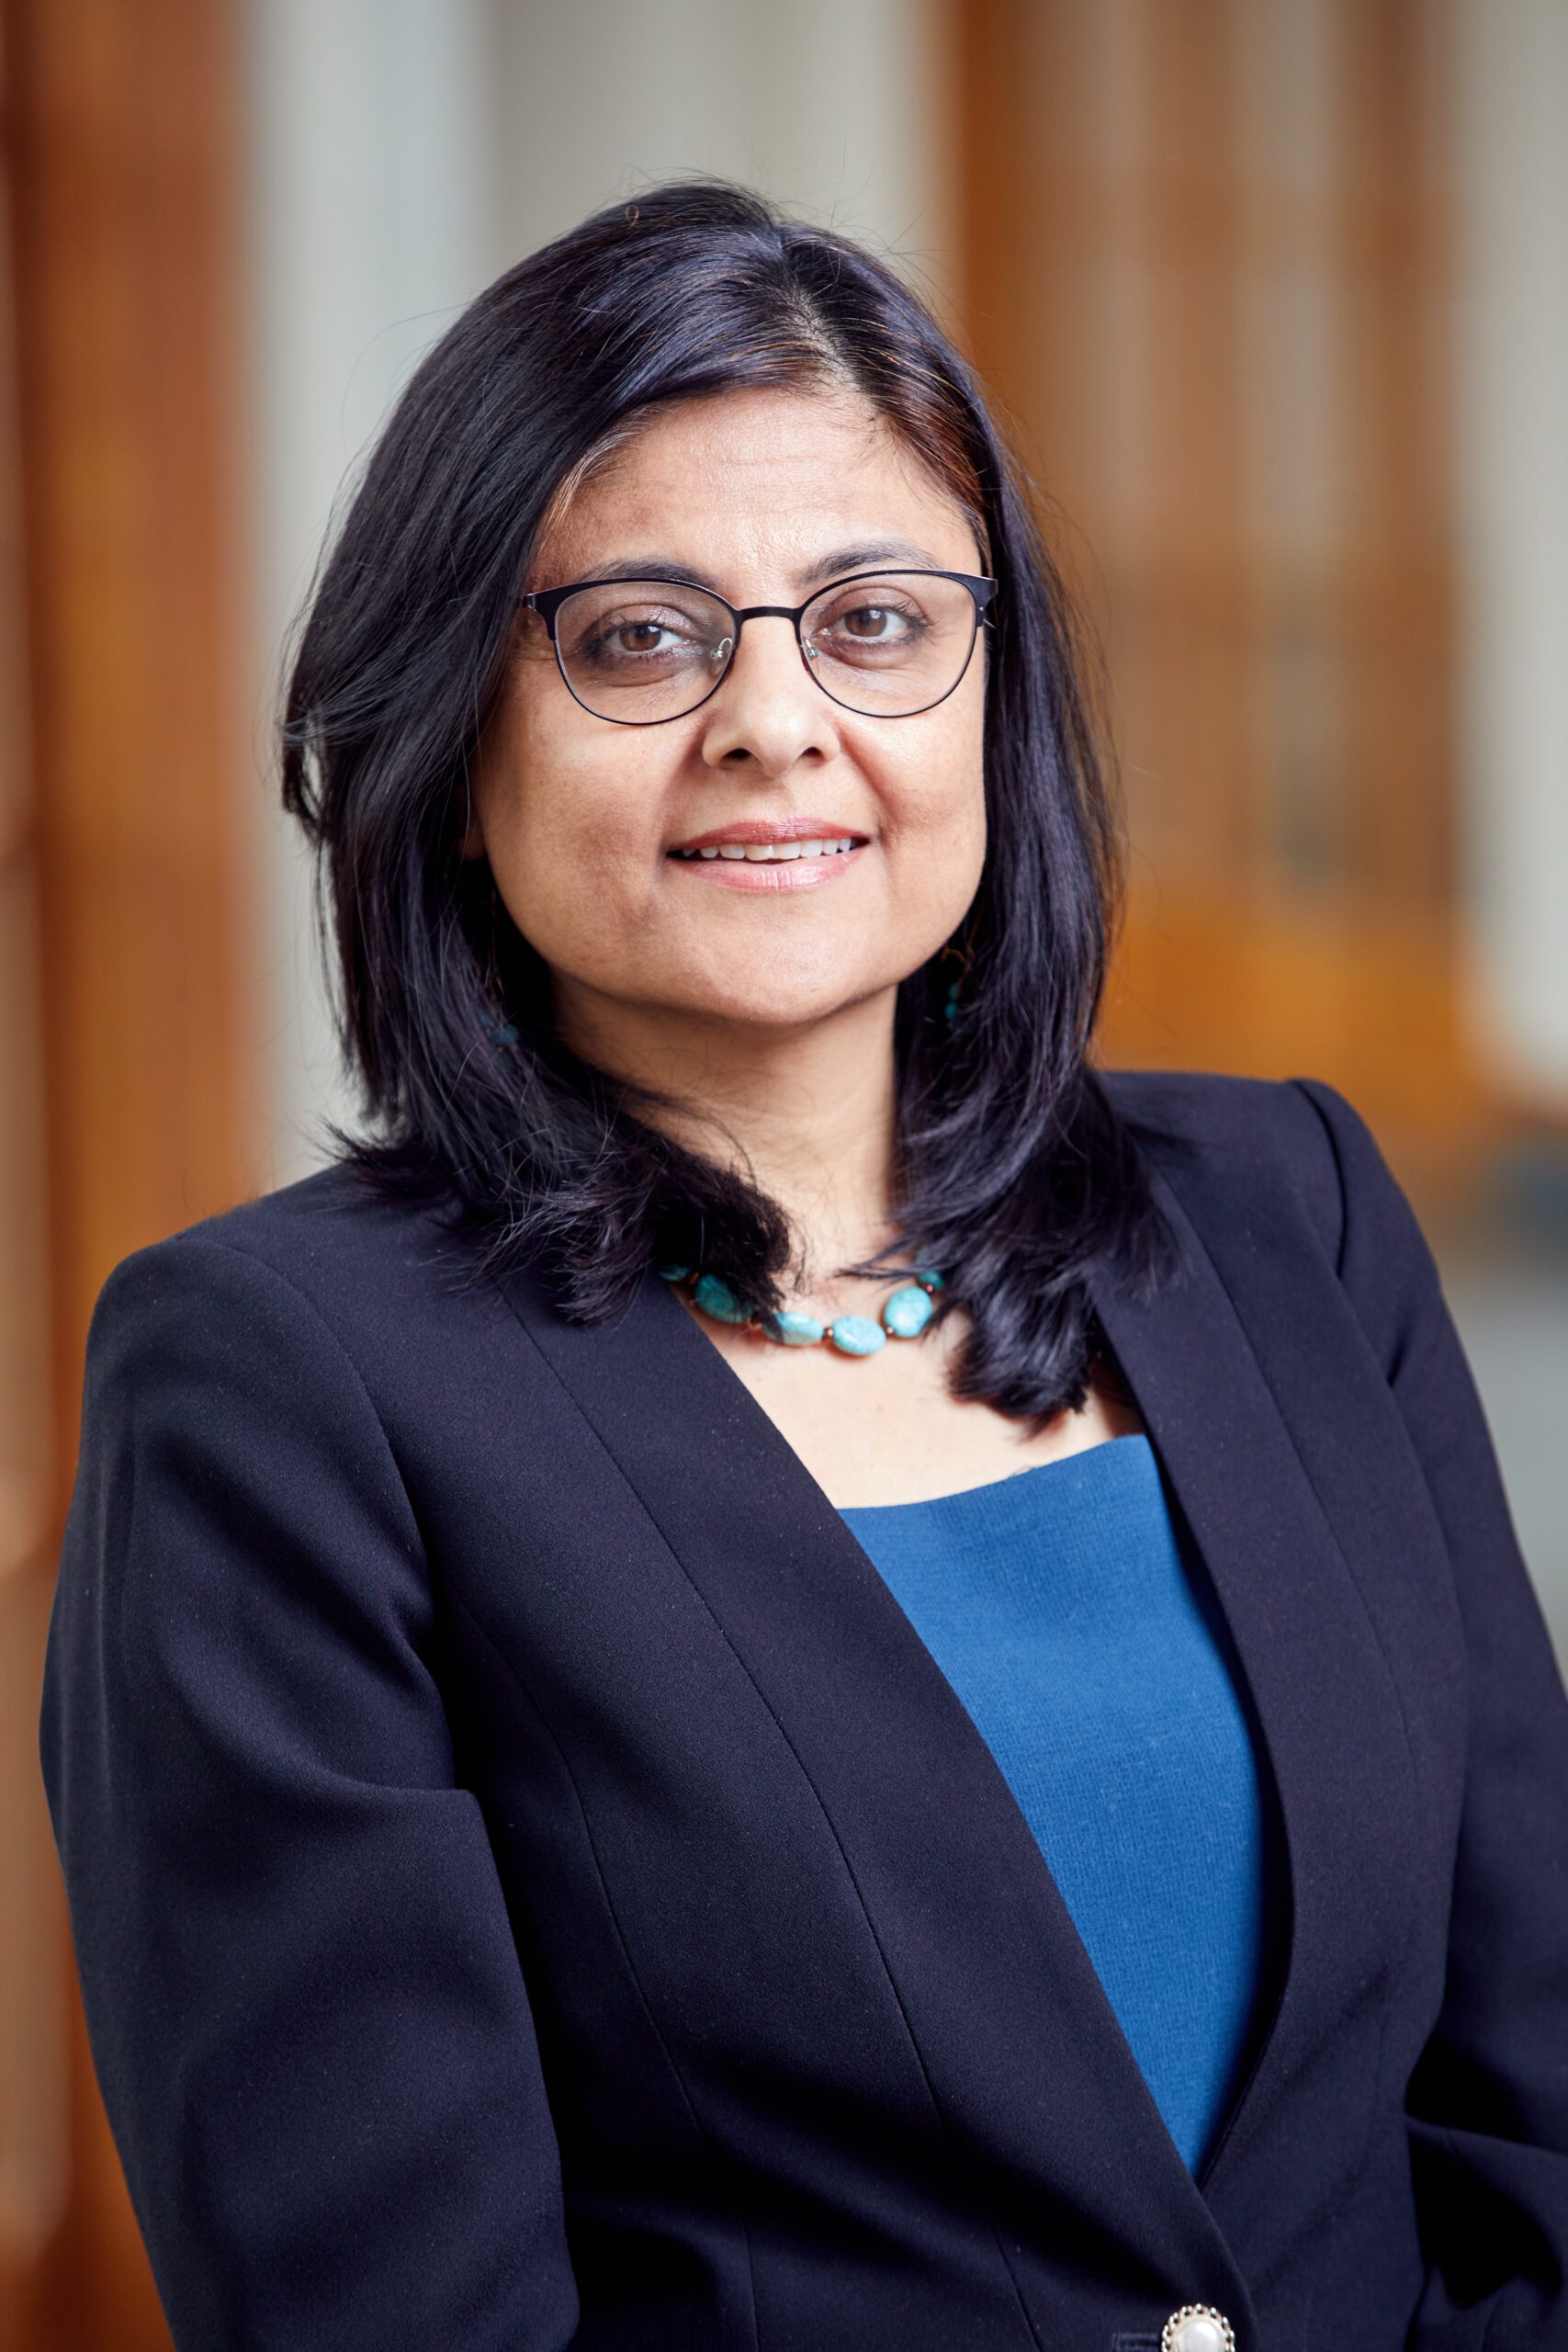 Emory Healthcare Appoints Dr. Nitu Kashyap as Chief Health Informatics Officer